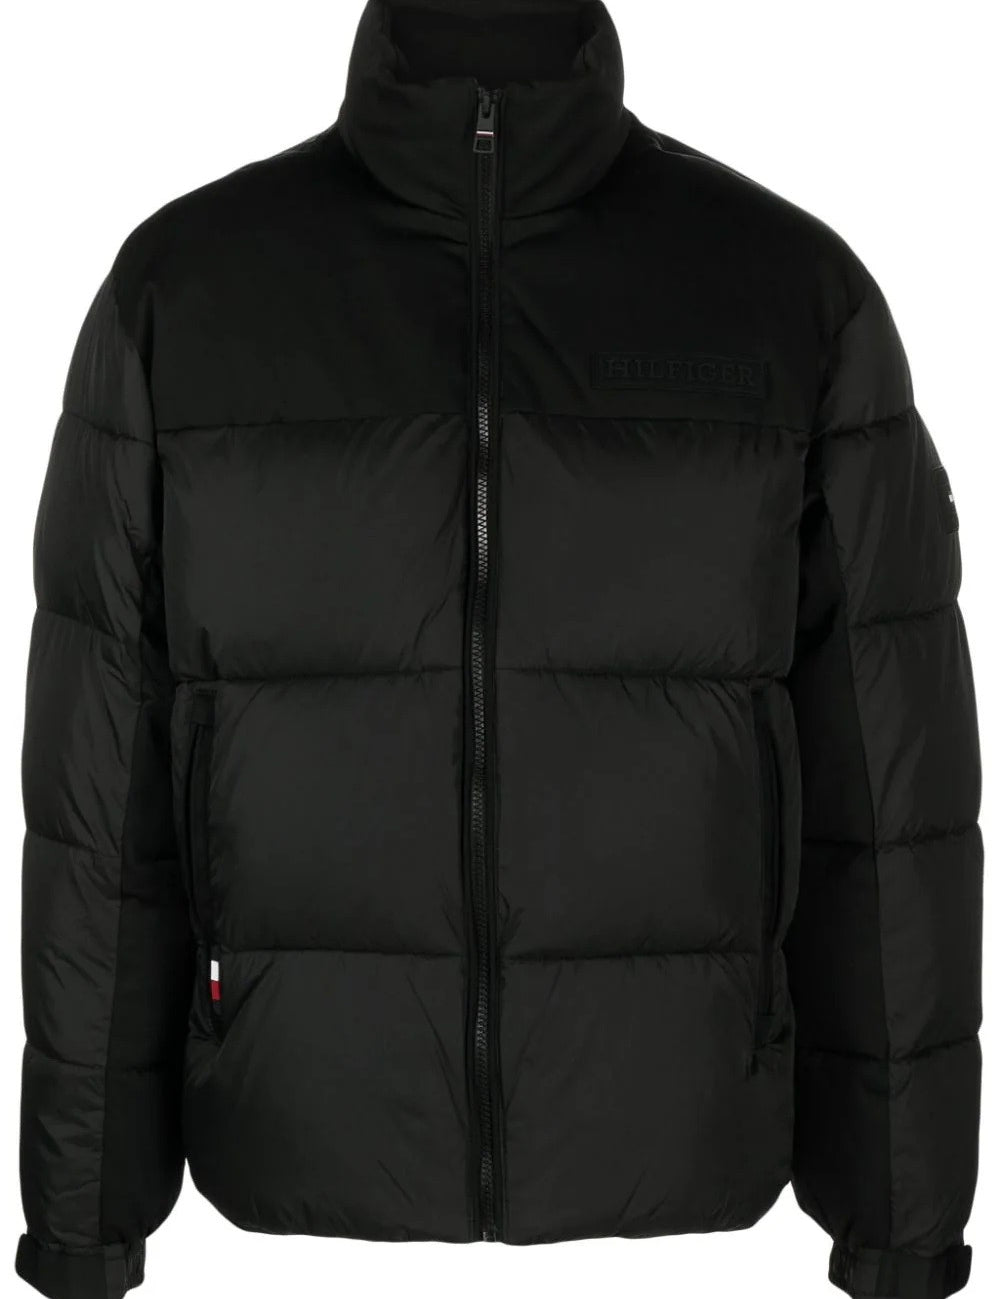 new-york-puffer-jacket_46afe31d-1813-46ce-8351-cdf208323aed.jpg